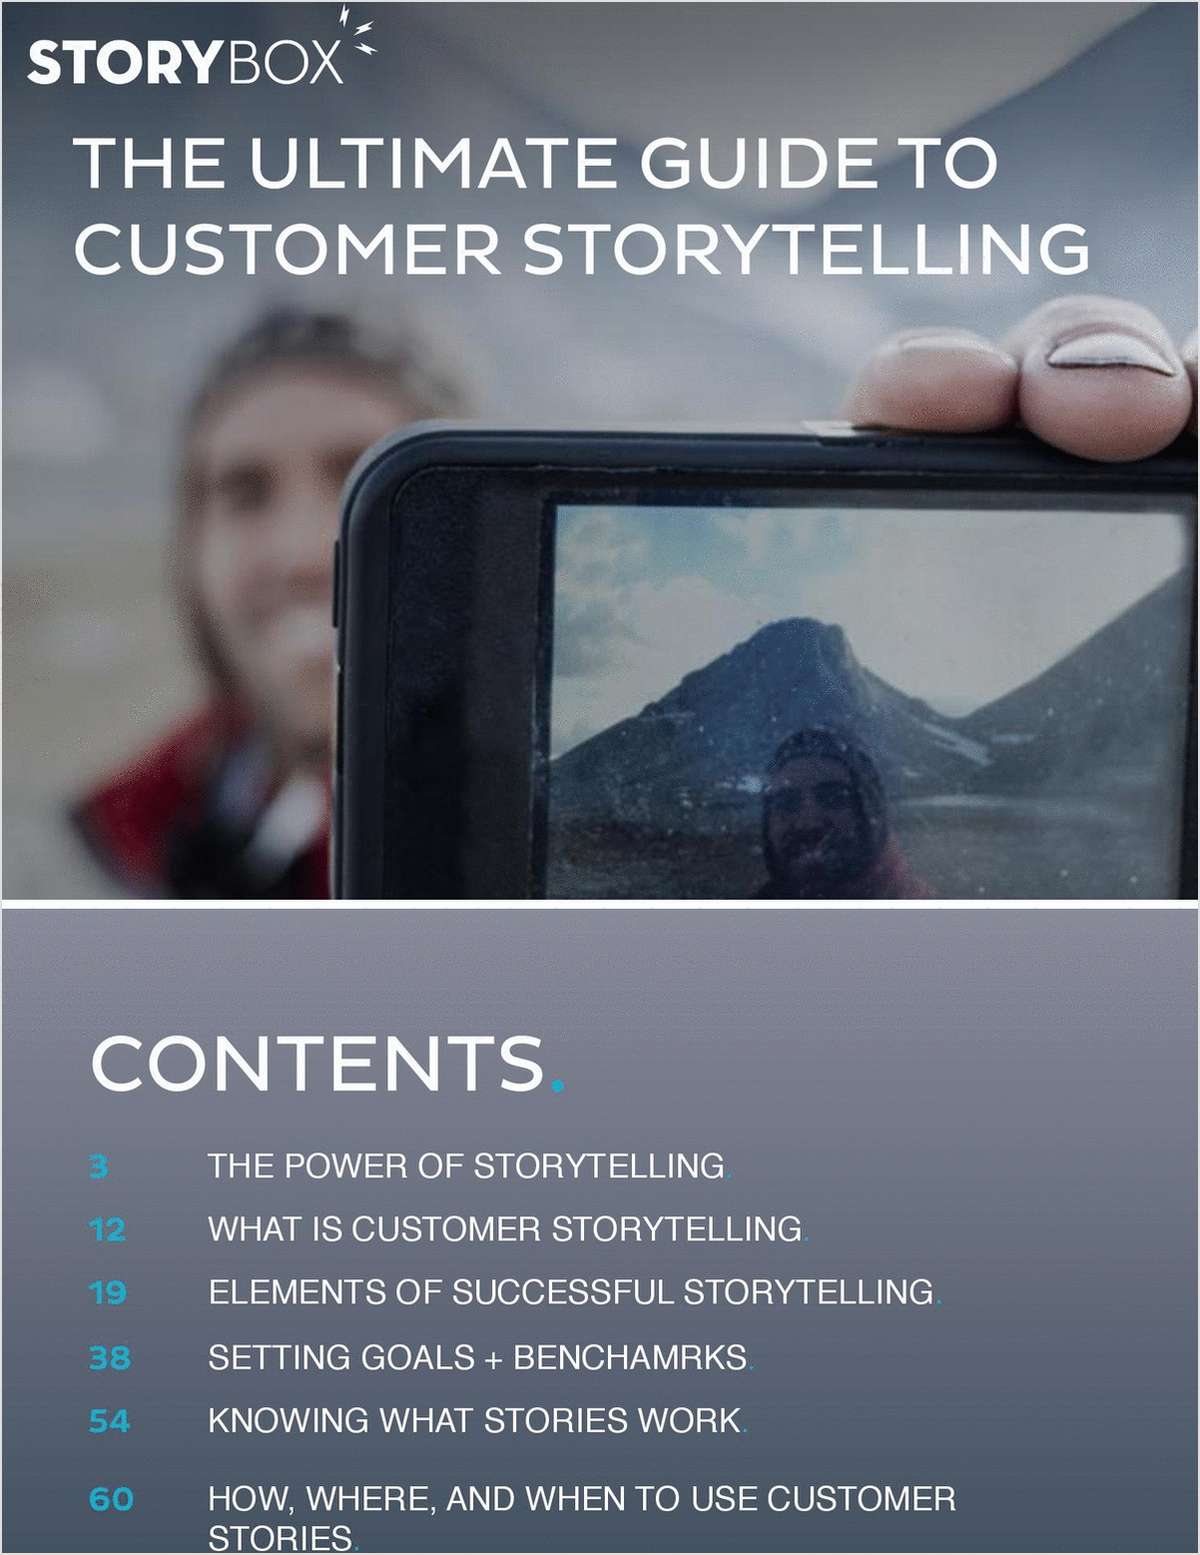 The Ultimate Guide to Customer Storytelling